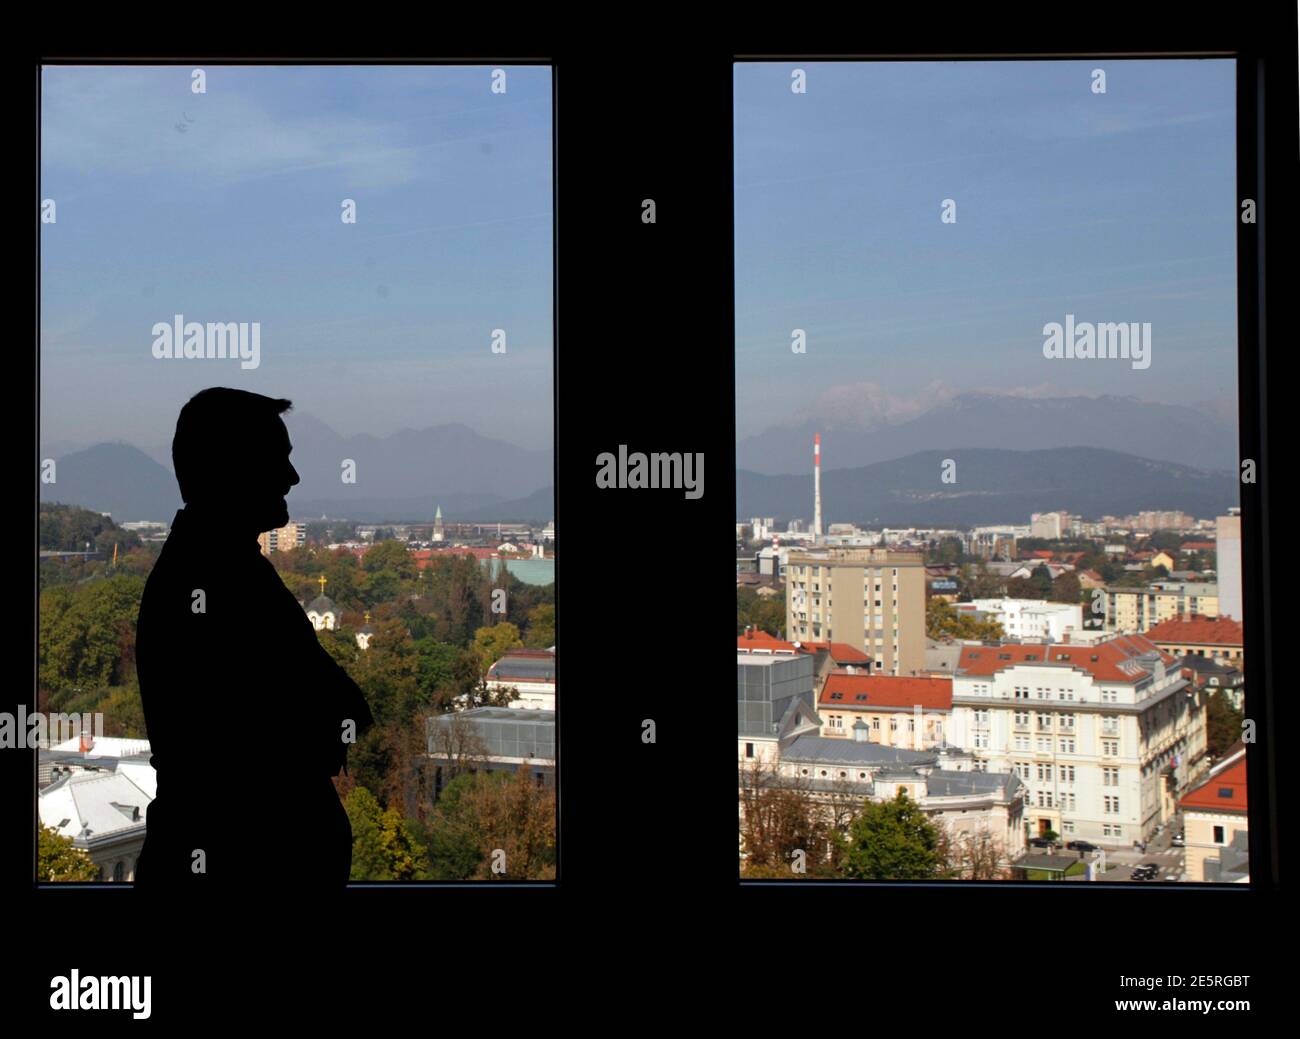 Janko Medja, CEO of NLB bank, is silhouetted as he poses before an interview in Ljubljana September 29, 2014. Slovenia's top bank NLB (Nova Ljubljanska Banka) is likely to pass an EU-wide stress test after nearly collapsing under bad loans in 2013, but the government must press on with selling state assets to ensure stability, Medja said. REUTERS/Srdjan Zivulovic (SLOVENIA - Tags: BUSINESS) Stock Photo